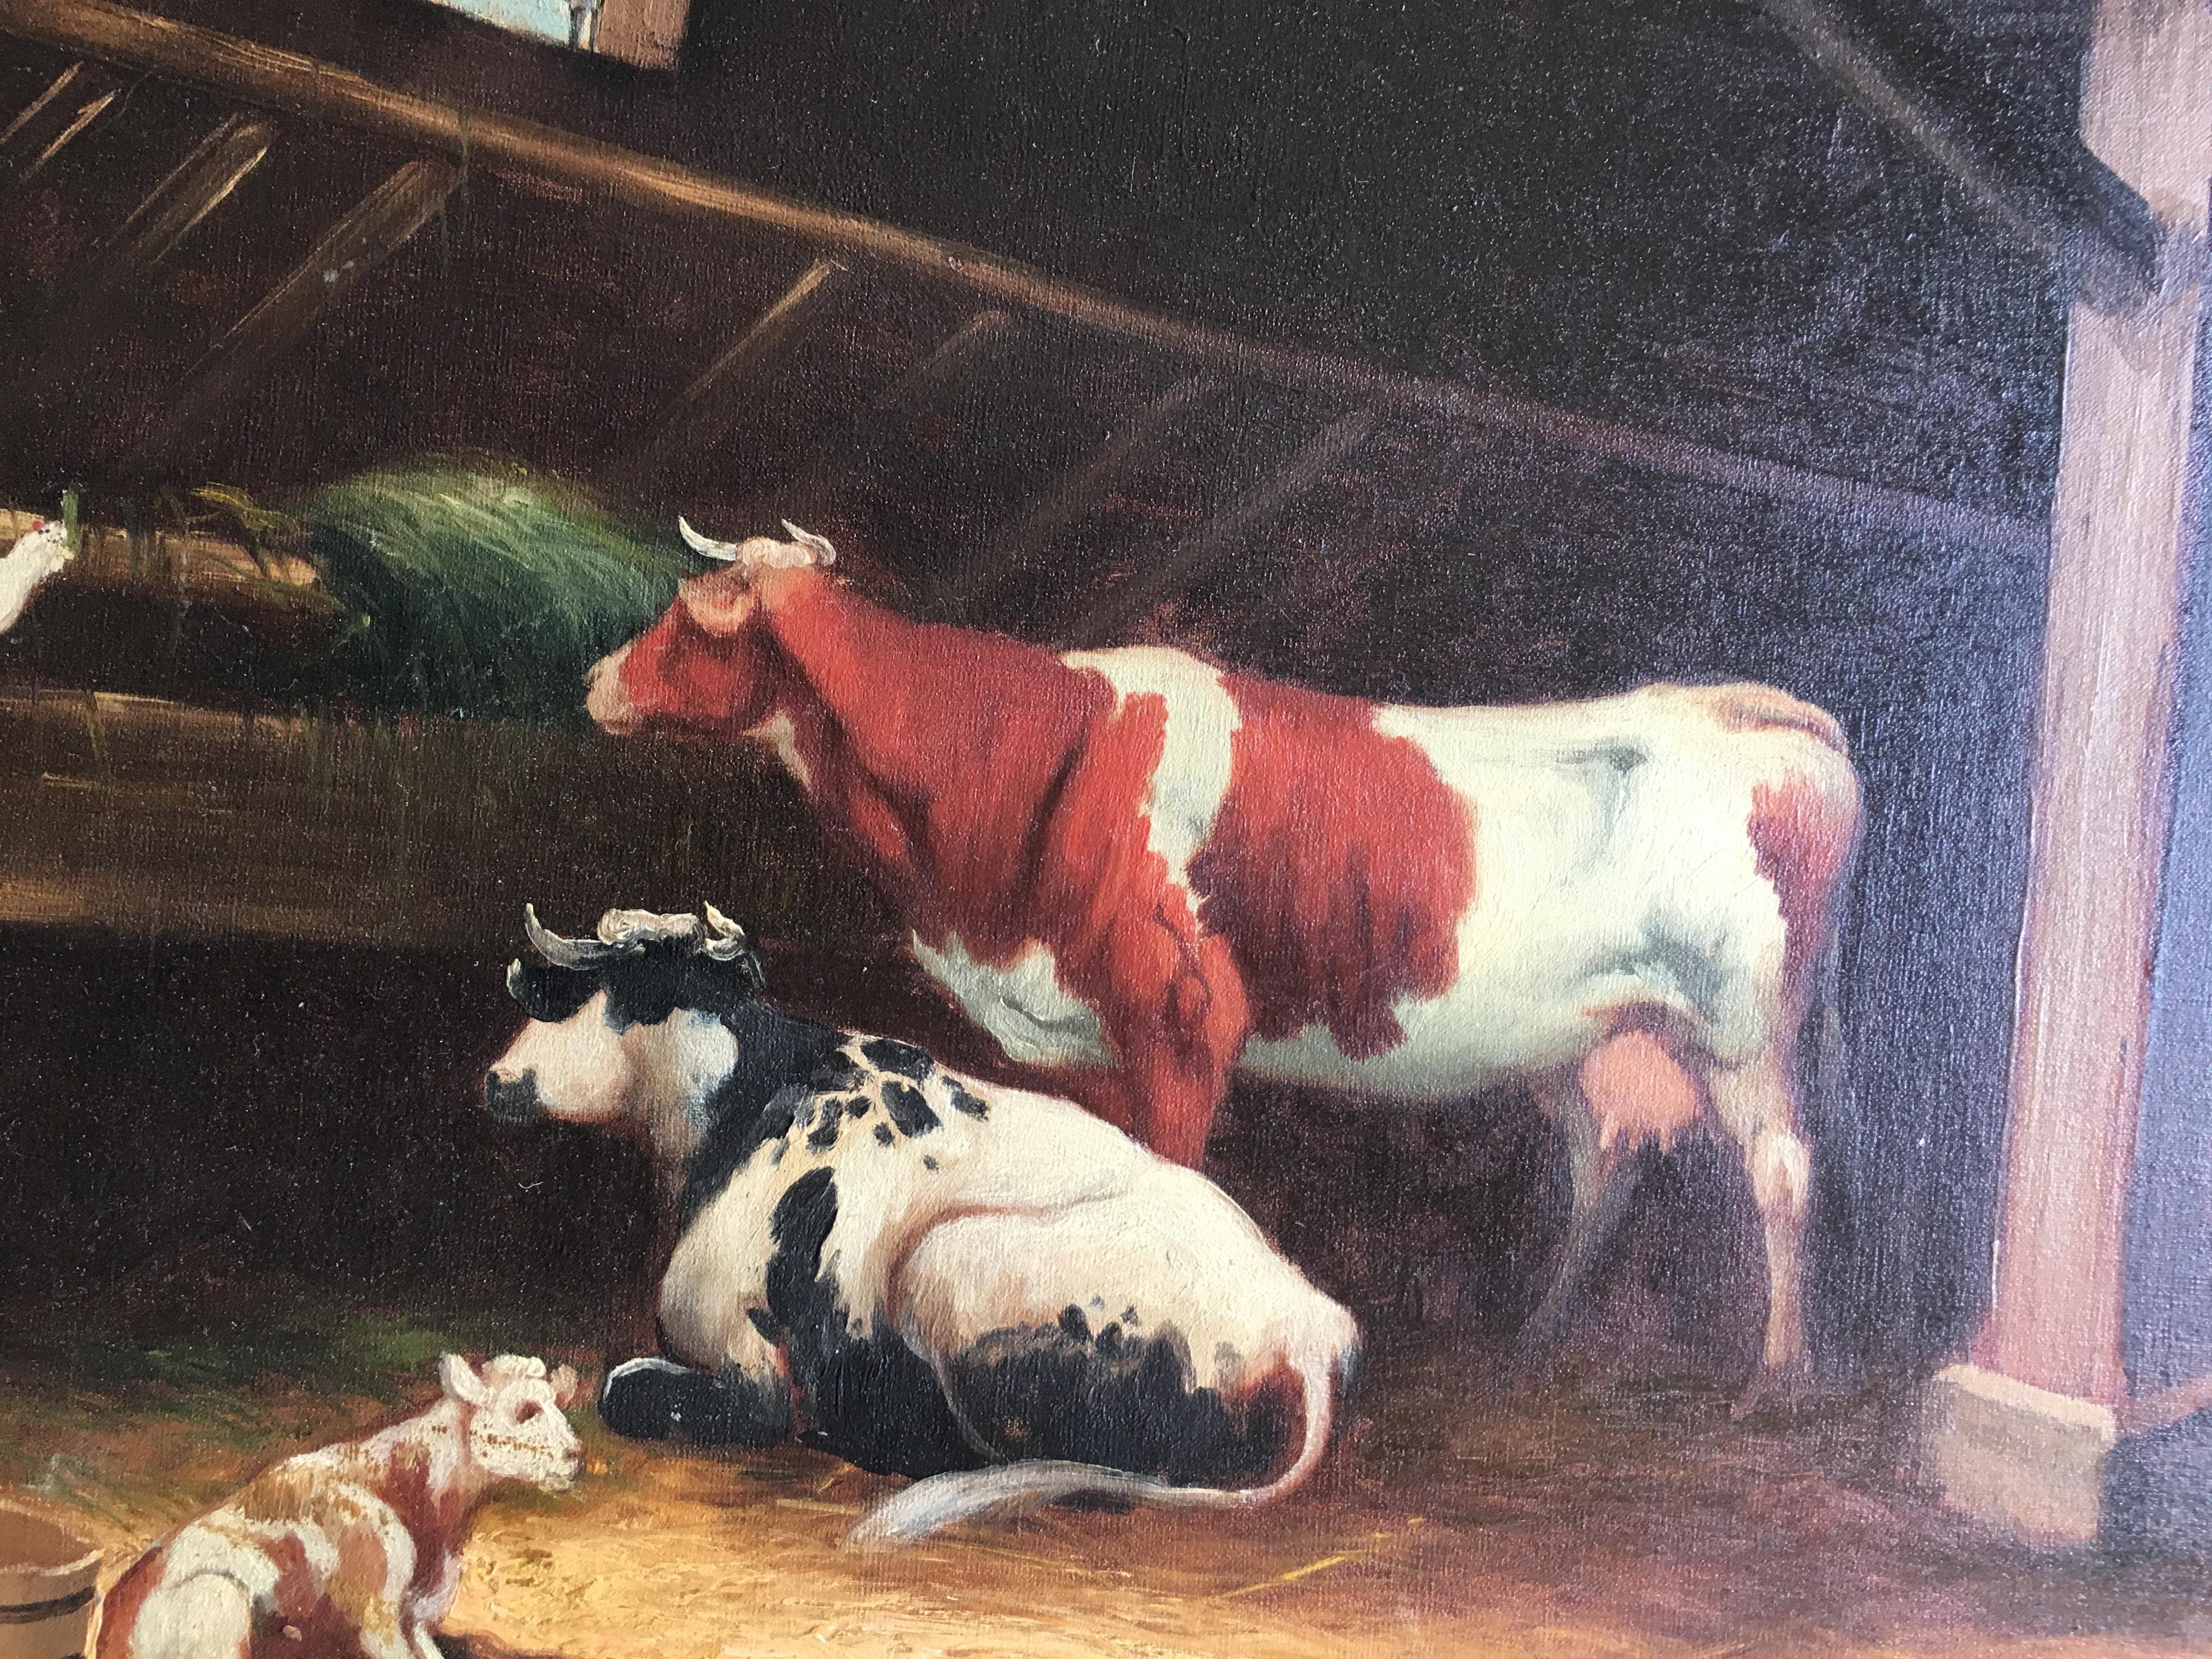 19th century American cattle/cows and chickens in a stable with calves  - Painting by Unknown